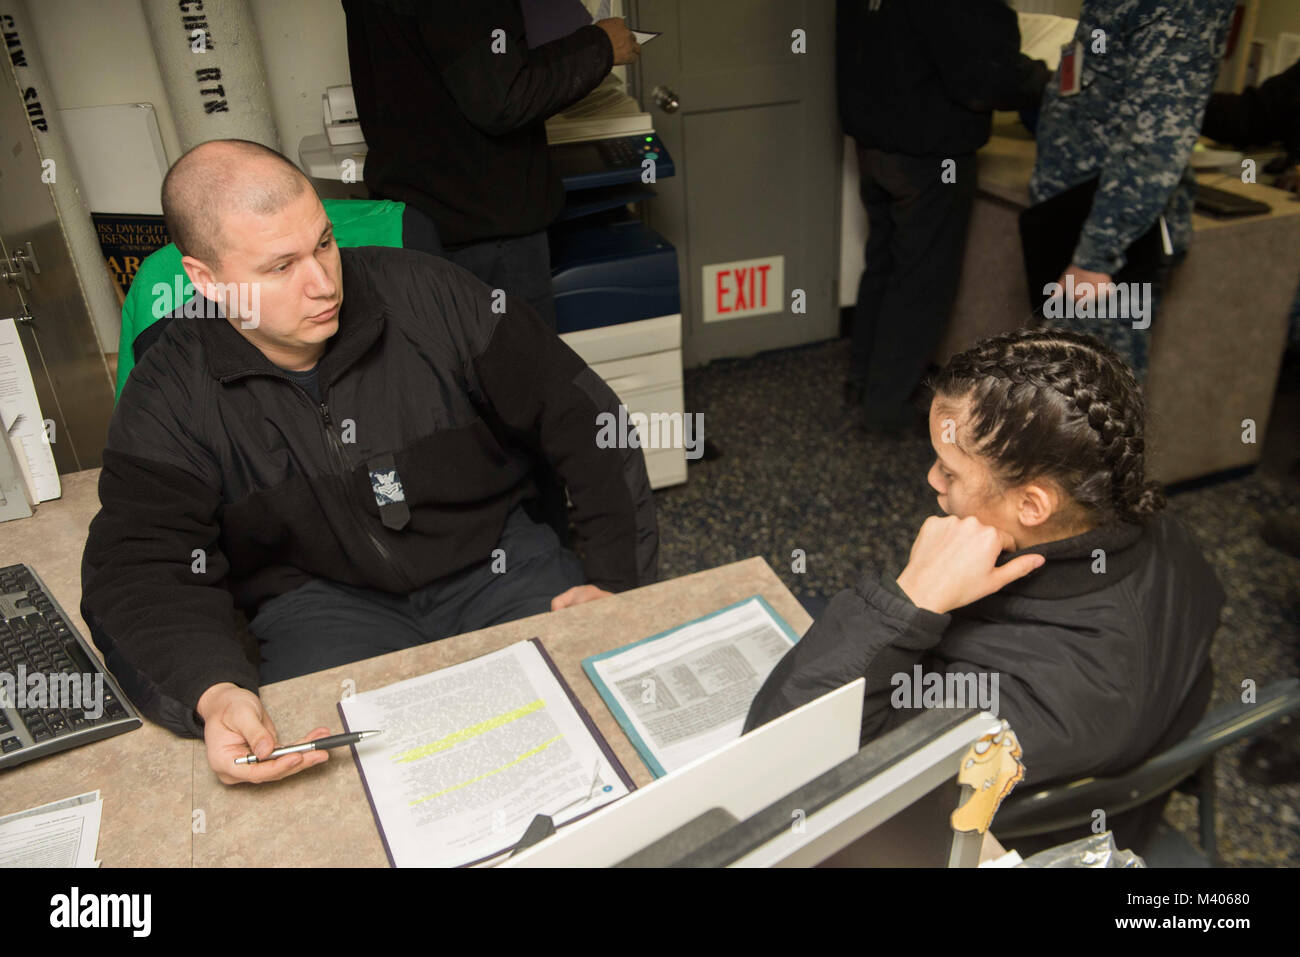 180206-N-KJ380-013  PORTSMOUTH, Va. (Feb. 6, 2017) Navy Career Counselor 1st ClassCody Wood, left, from Iona, Mich., helps Yeoman 3rd Class Jahaira Aponte, from Philadelphia, with paperwork in the career counseling office aboard the aircraft carrier USS Dwight D. Eisenhower (CVN 69)(Ike). Ike is undergoing a Planned Incremental Availability (PIA) at Norfolk Naval Shipyard during the maintenance phase of the Optimized Fleet Response Plan (OFRP). (U.S. Navy photo by Mass Communication Specialist 3rd Class Neo B. Greene III) Stock Photo